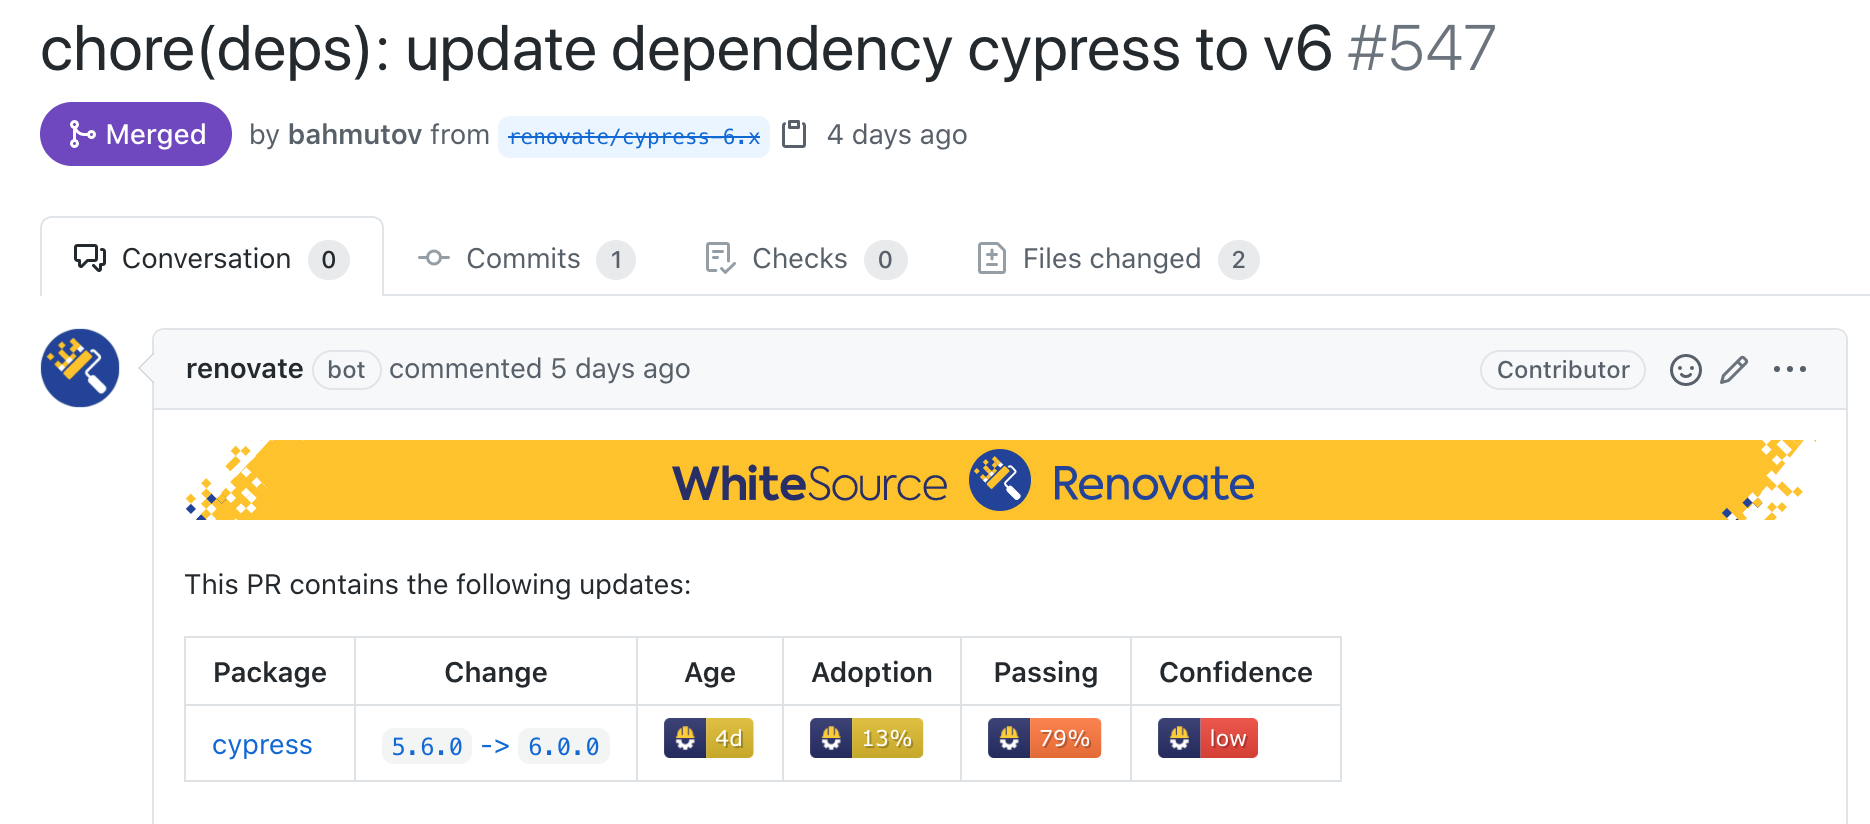 Merge confidence in Cypress v5 to v6 update